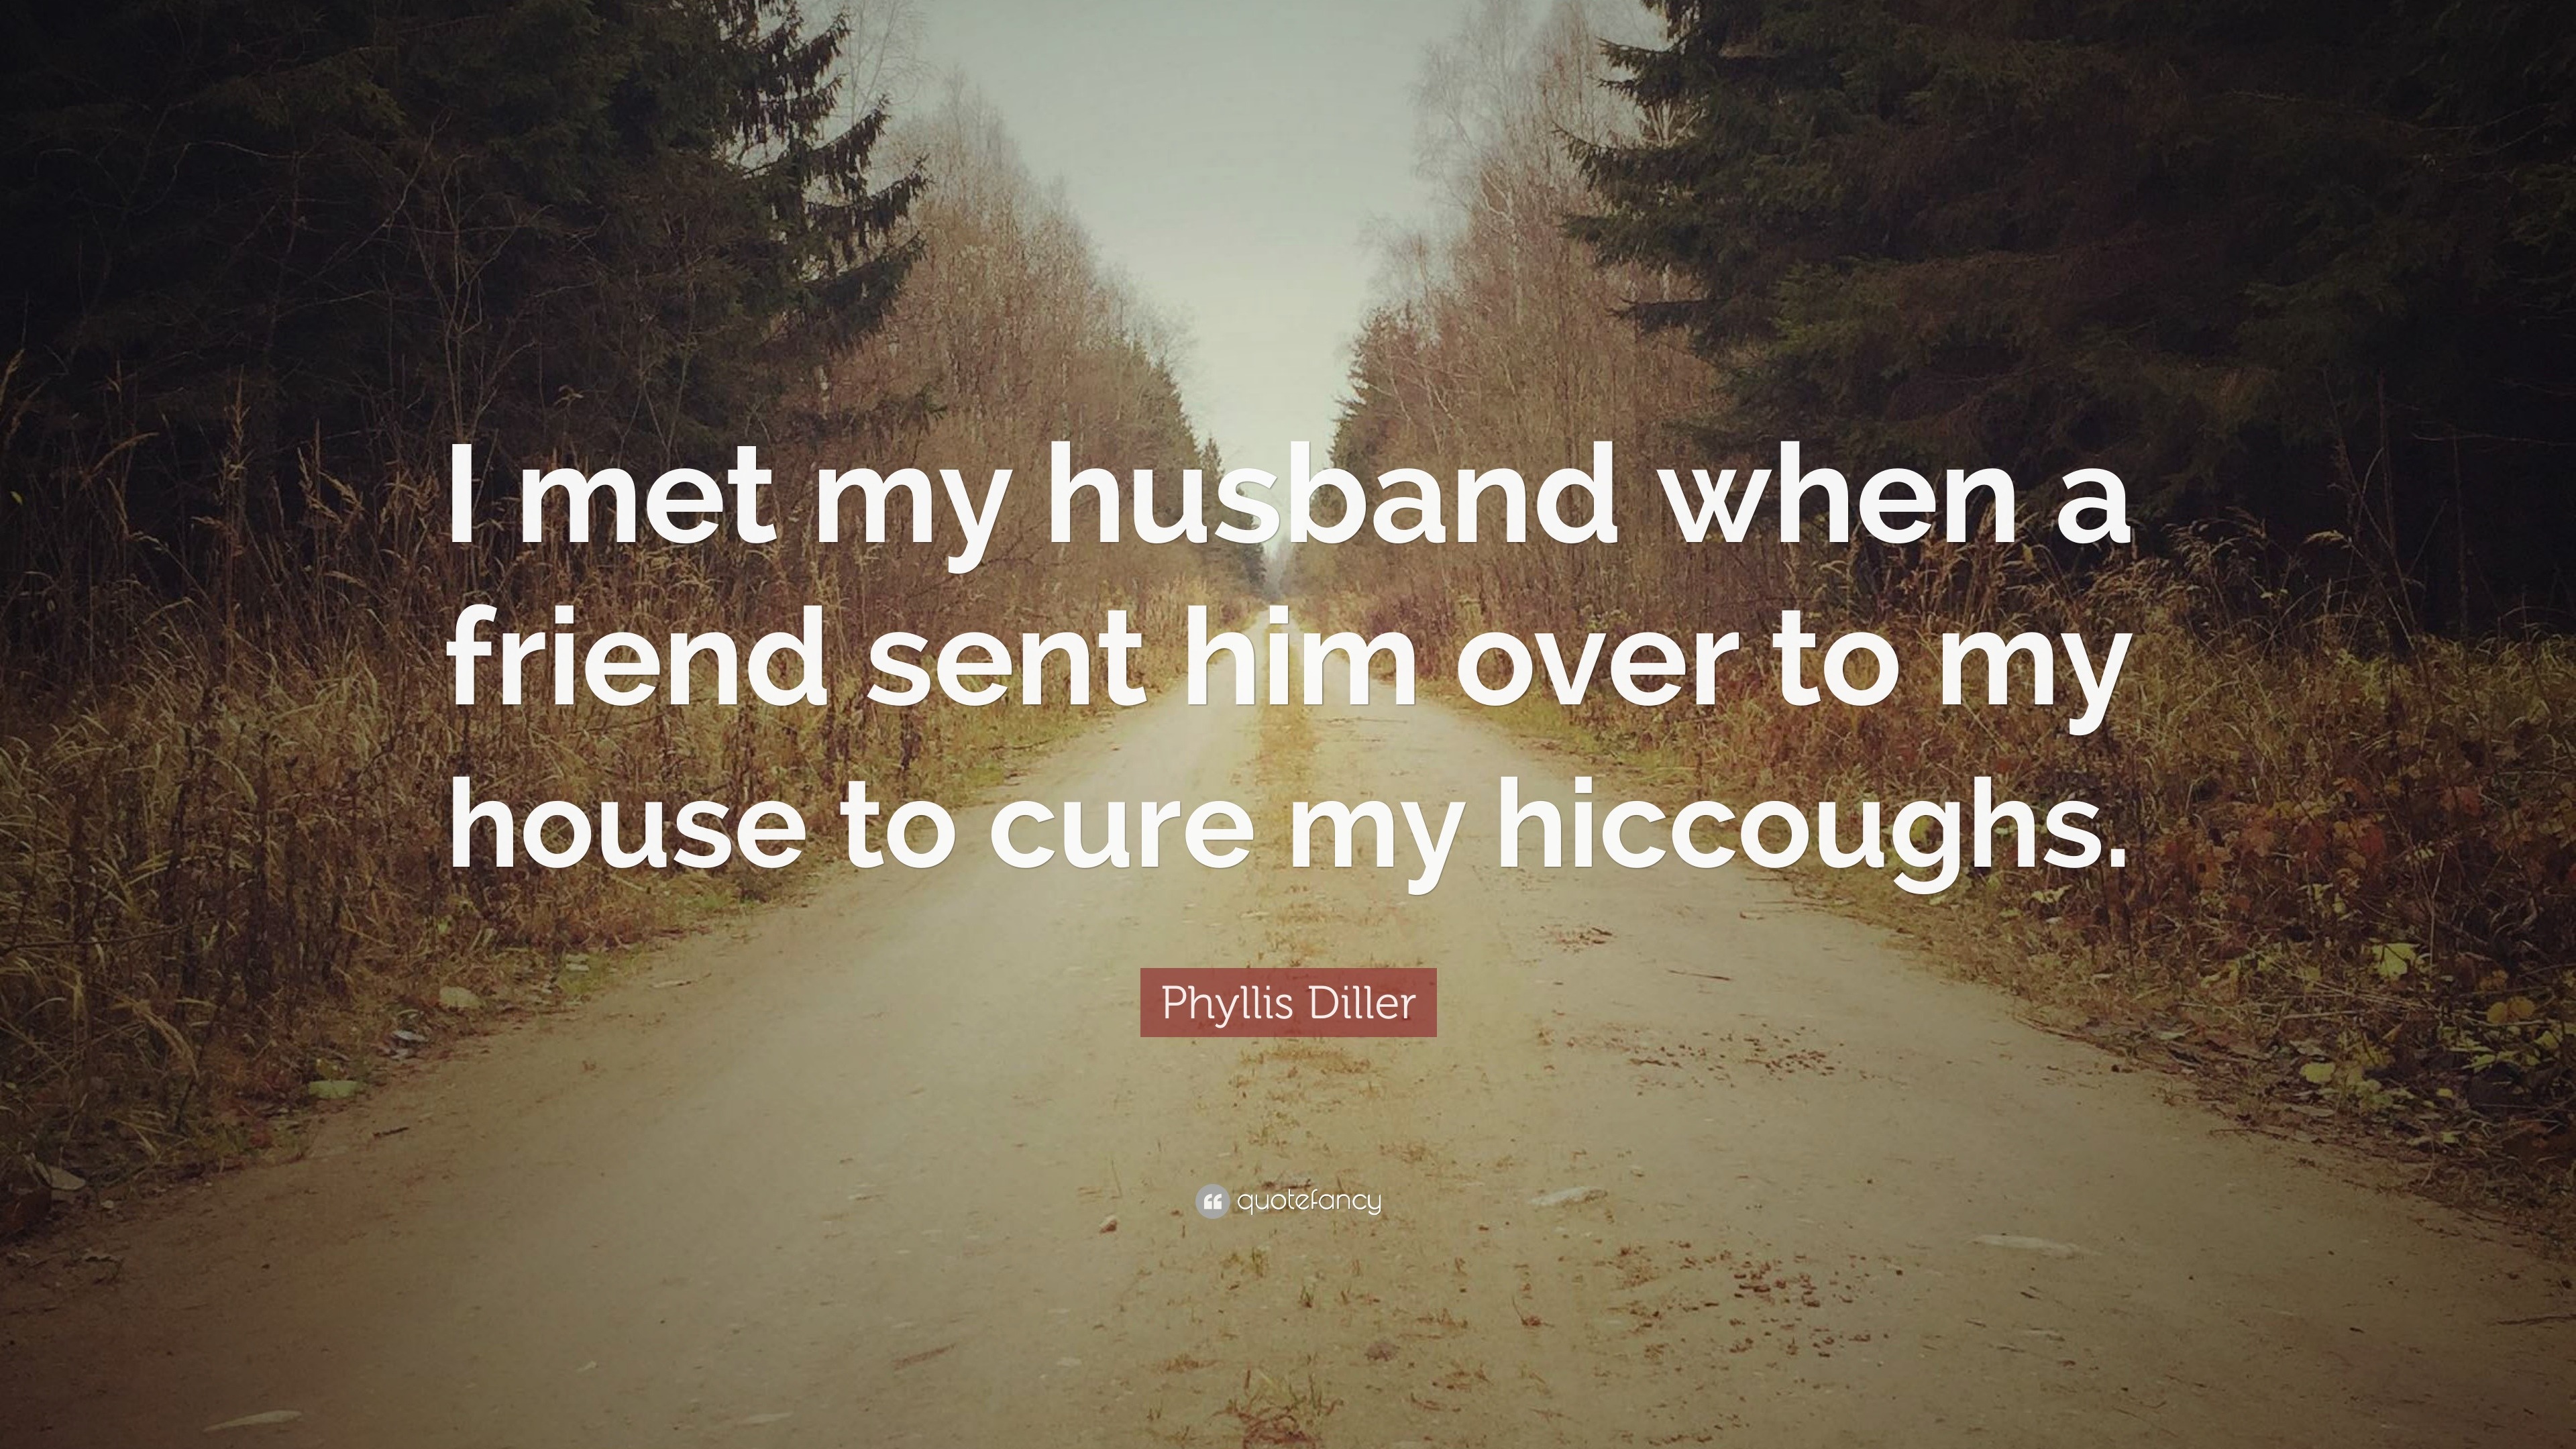 Phyllis Diller Quote: "I met my husband when a friend sent ...